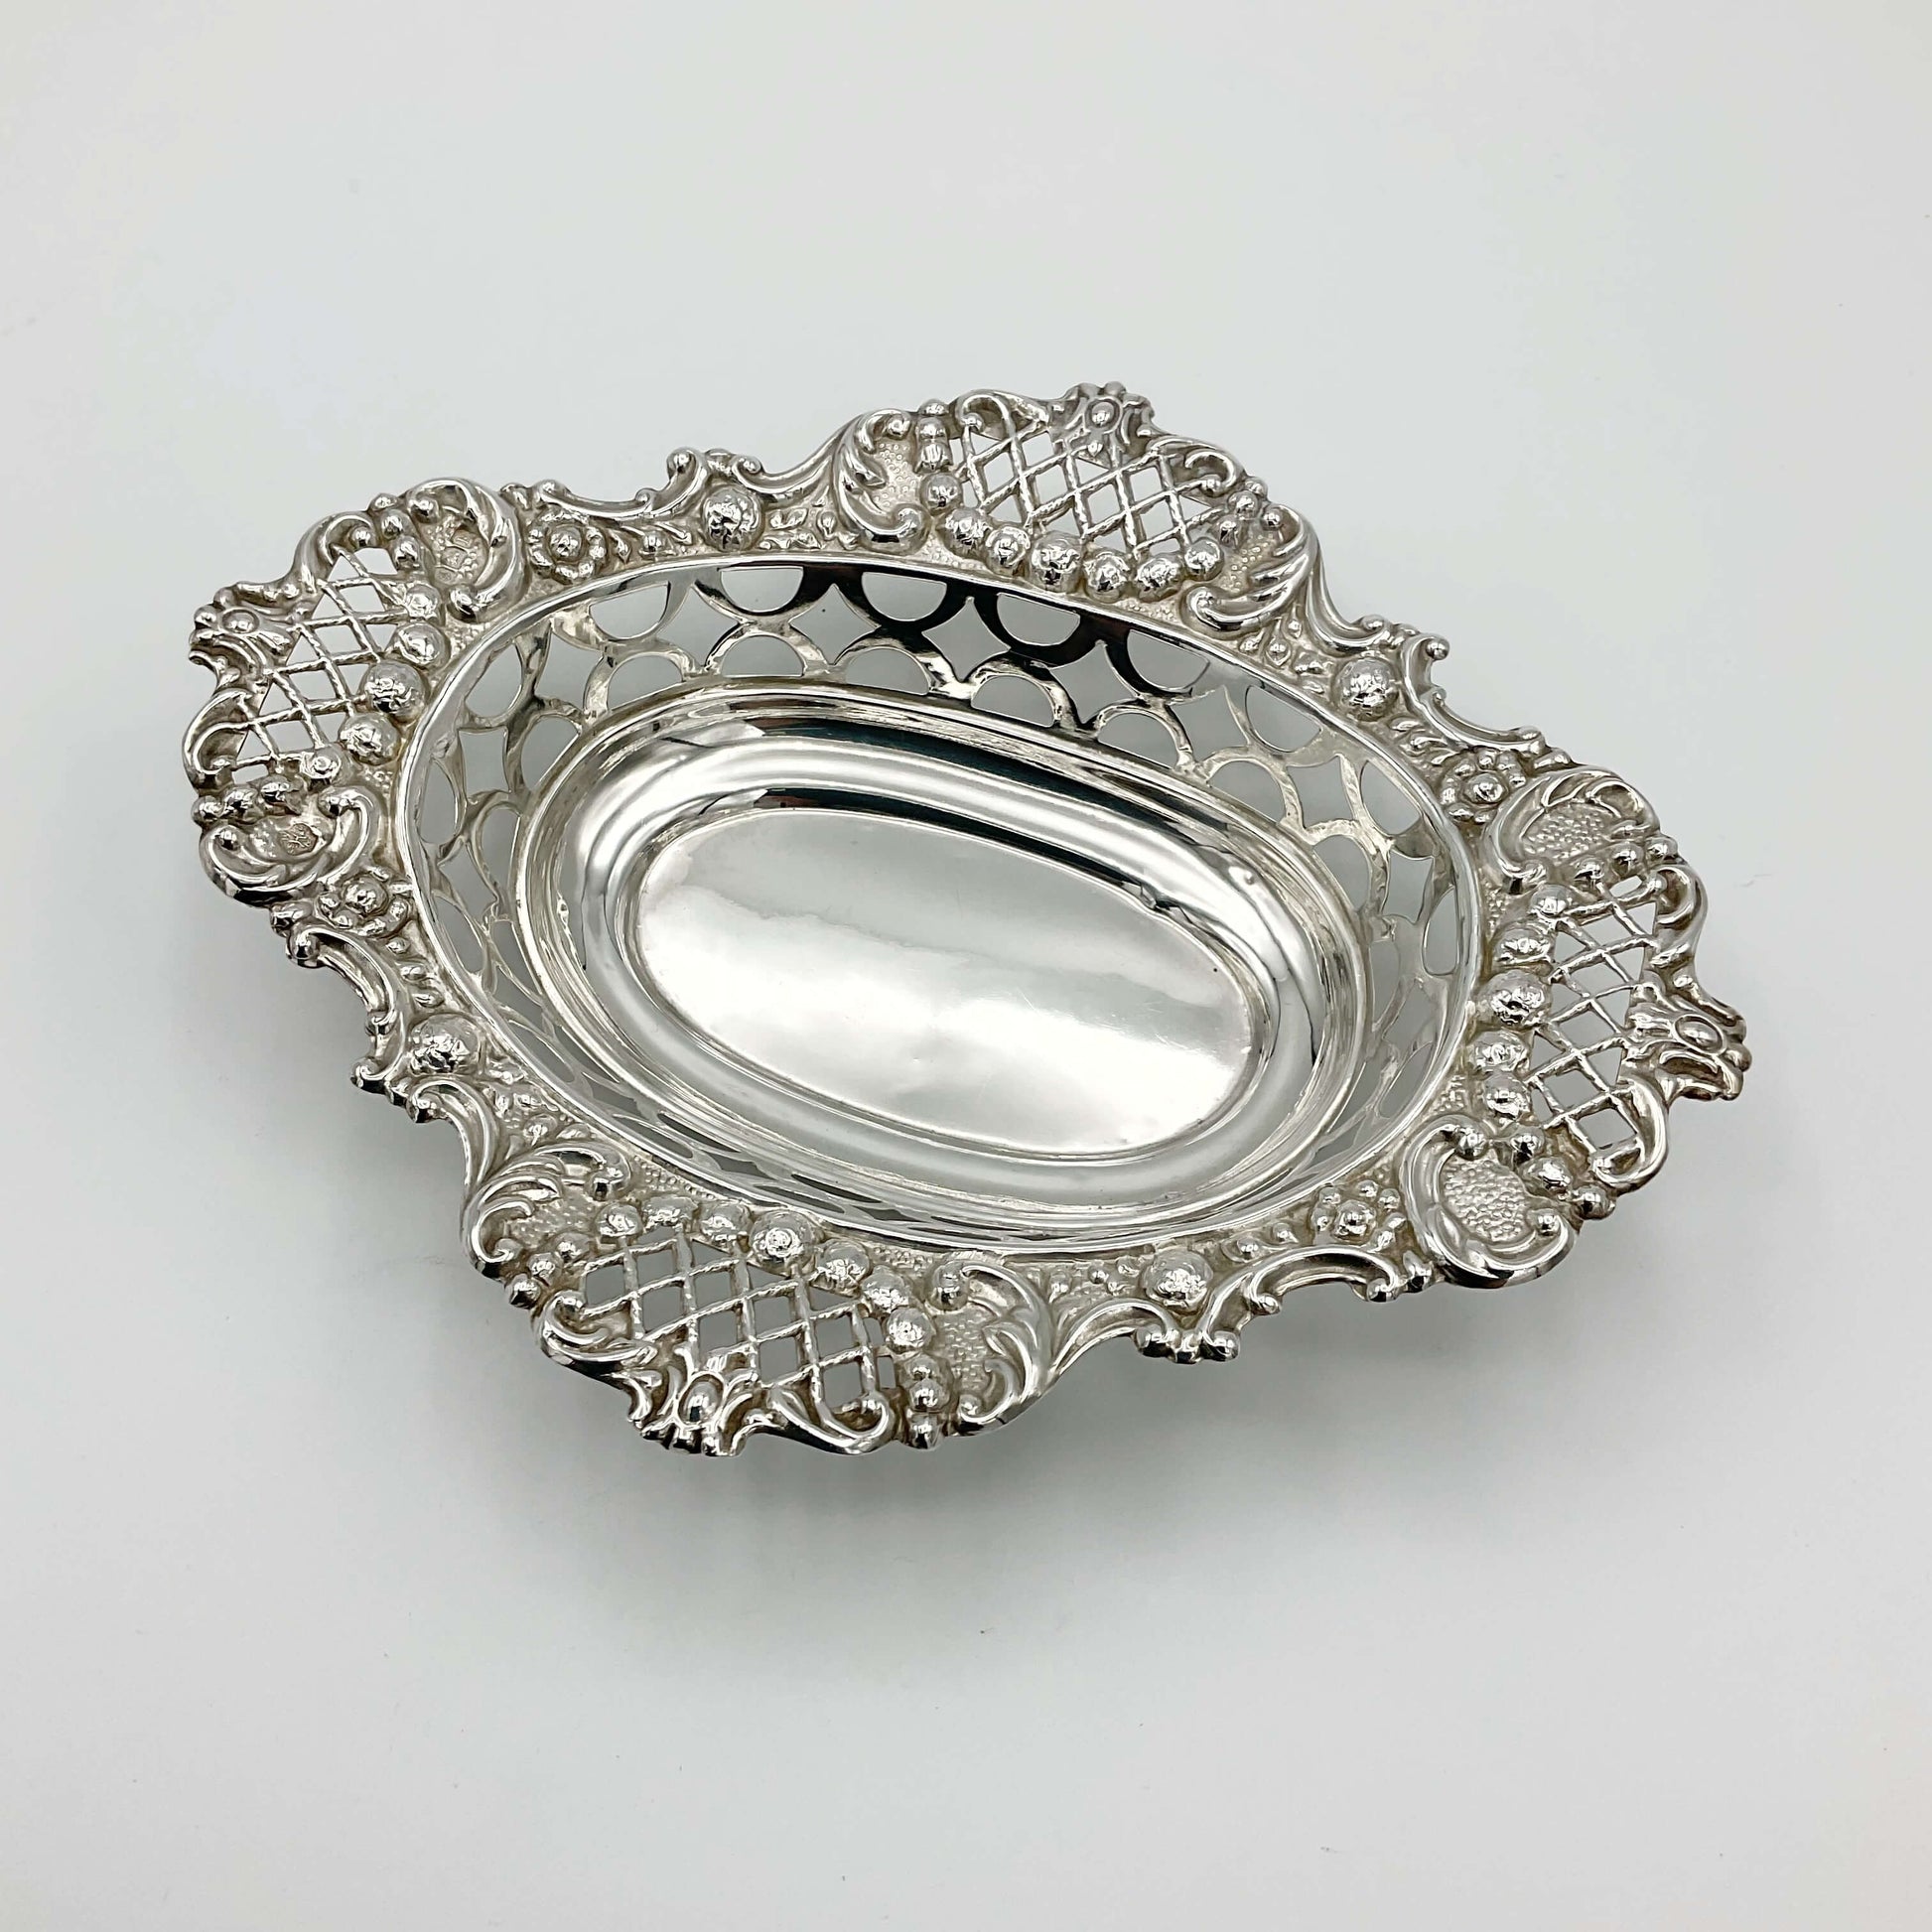 Antique Edwardian silver sweets bowl on white background 